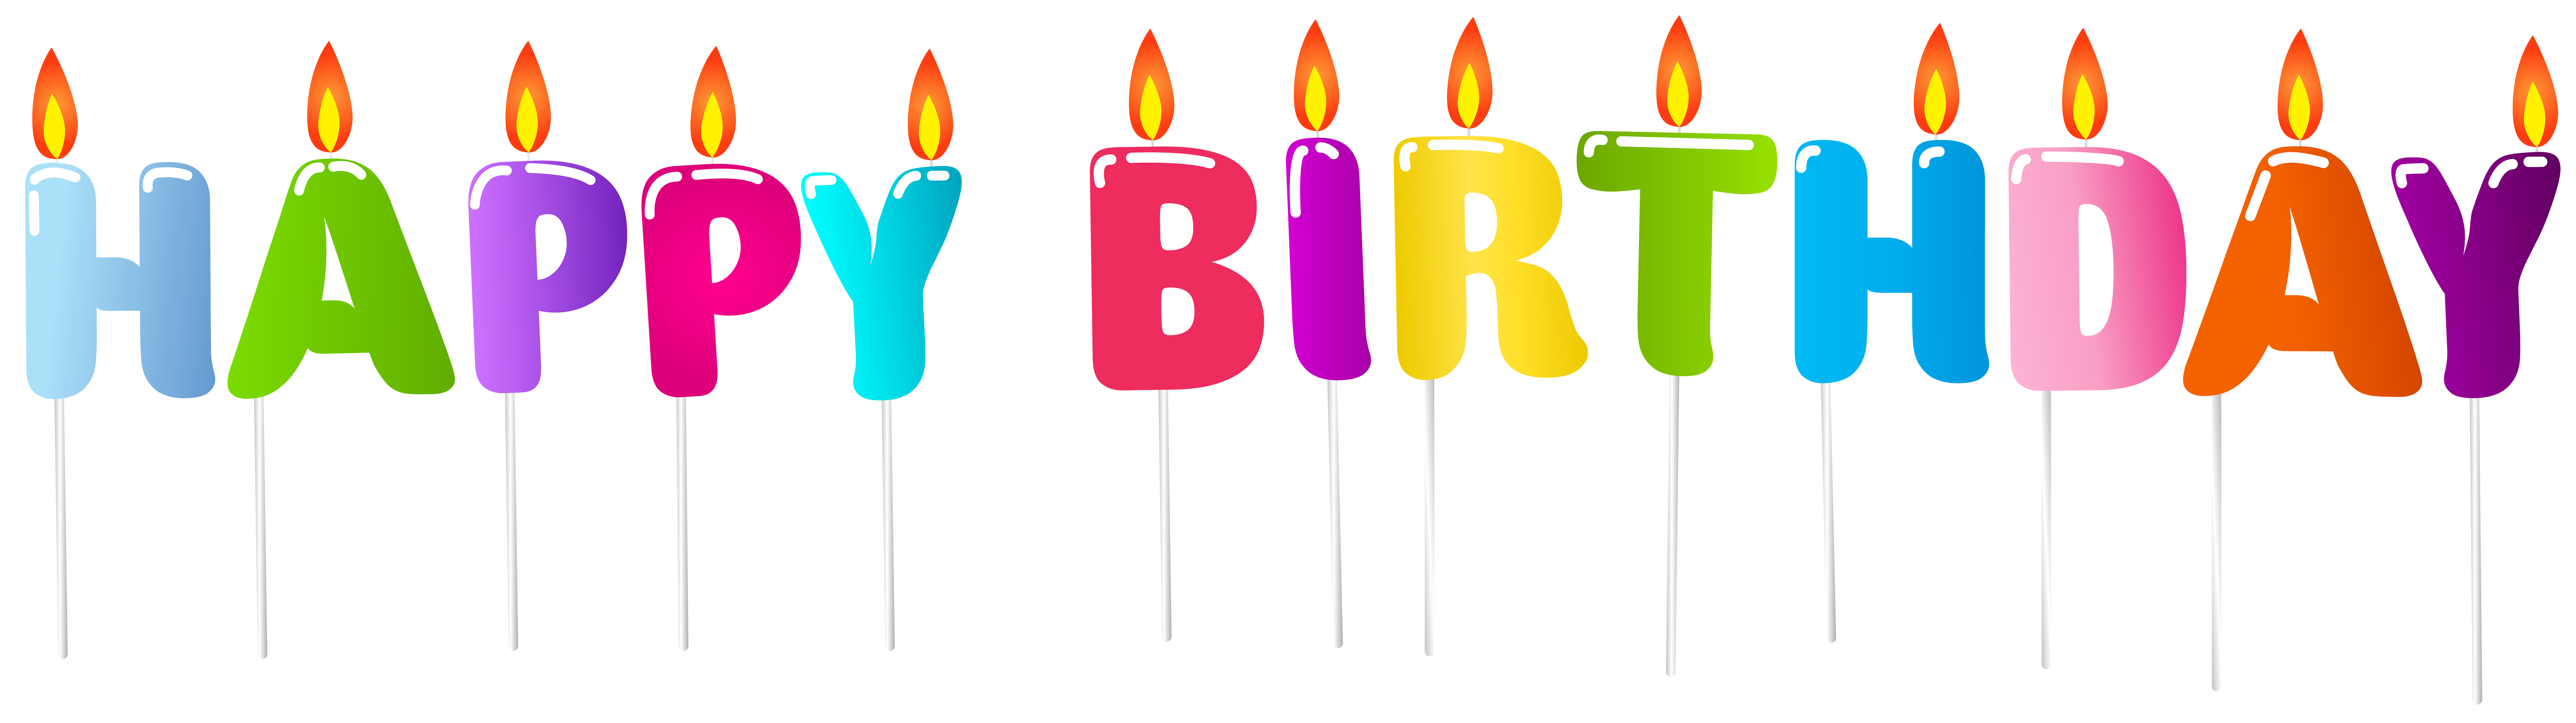 Happy Birthday Candles PNG Clip Art Image | Gallery Yopriceville ...